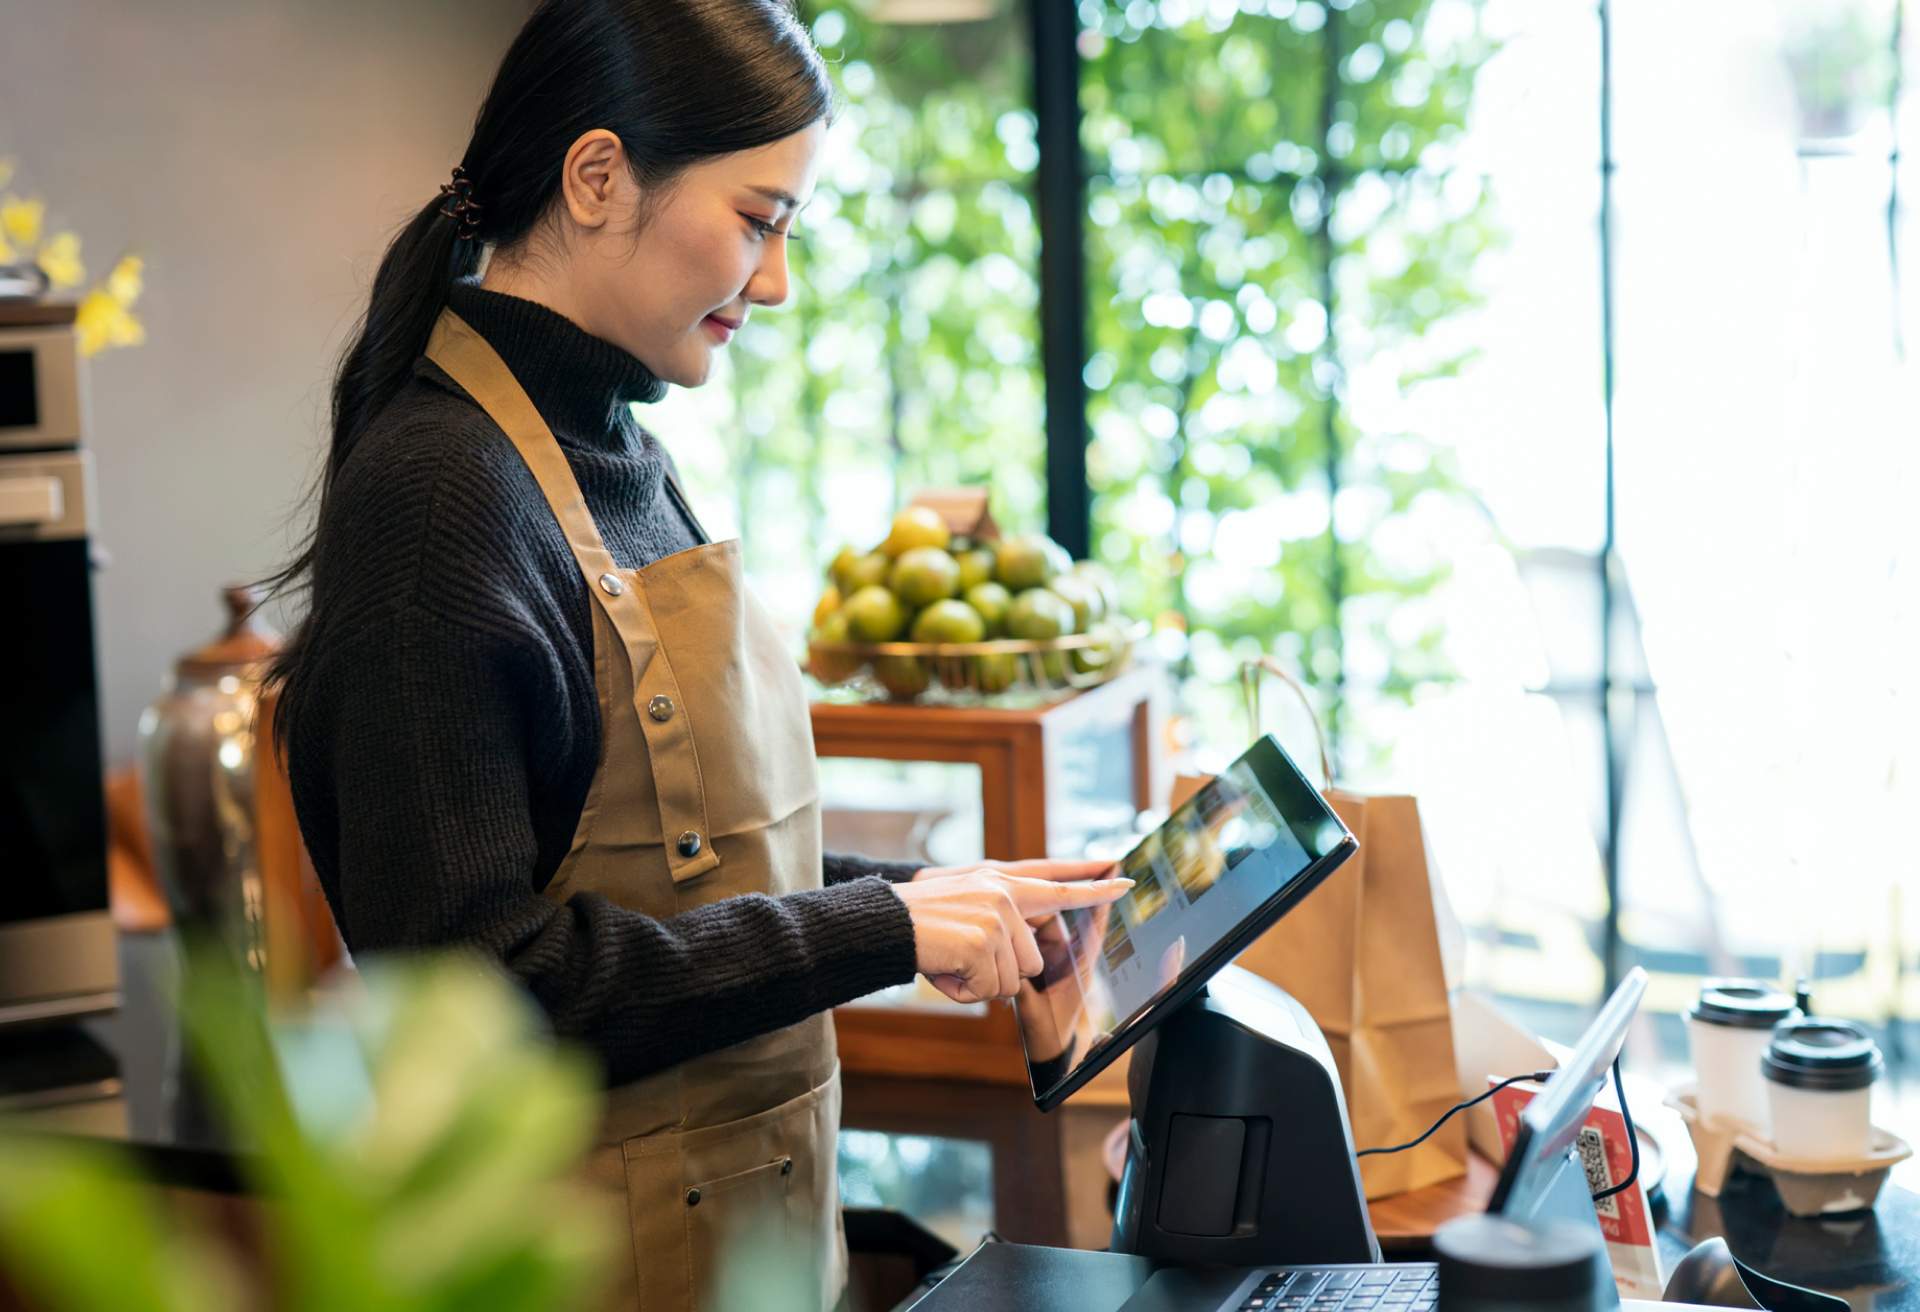 Image depicts a person wearing a black turtleneck and a brown apron using a mounted tablet in a restaurant.